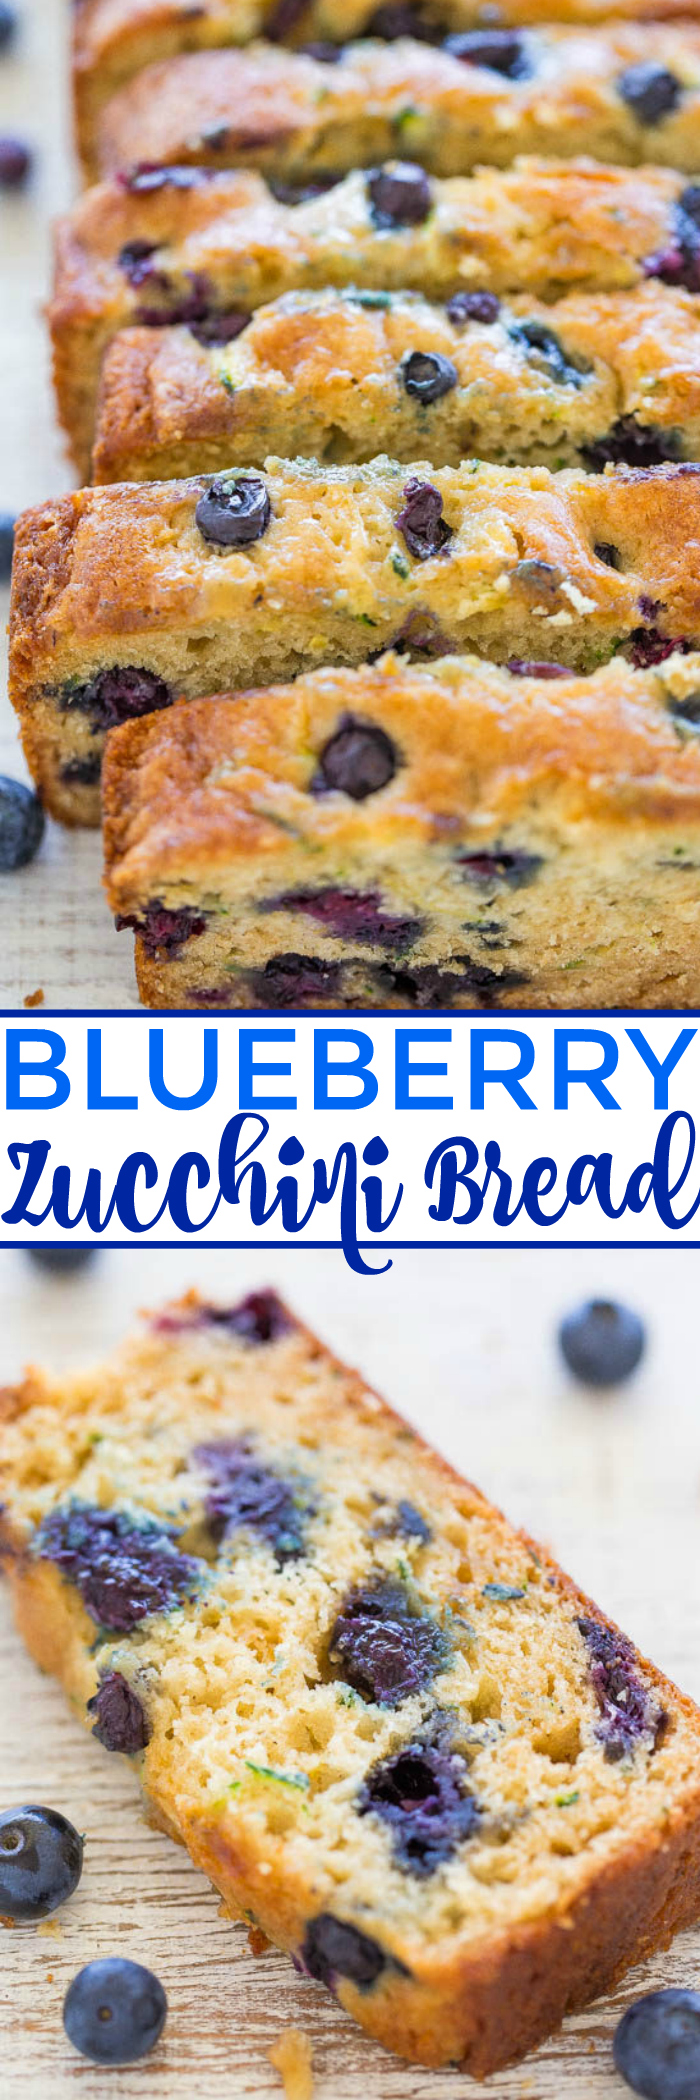 Blueberry Zucchini Bread — This blueberry zucchini bread is a quick, no-mixer recipe that's sweet, but not too sweet. Each bite is bursting with fresh blueberries!